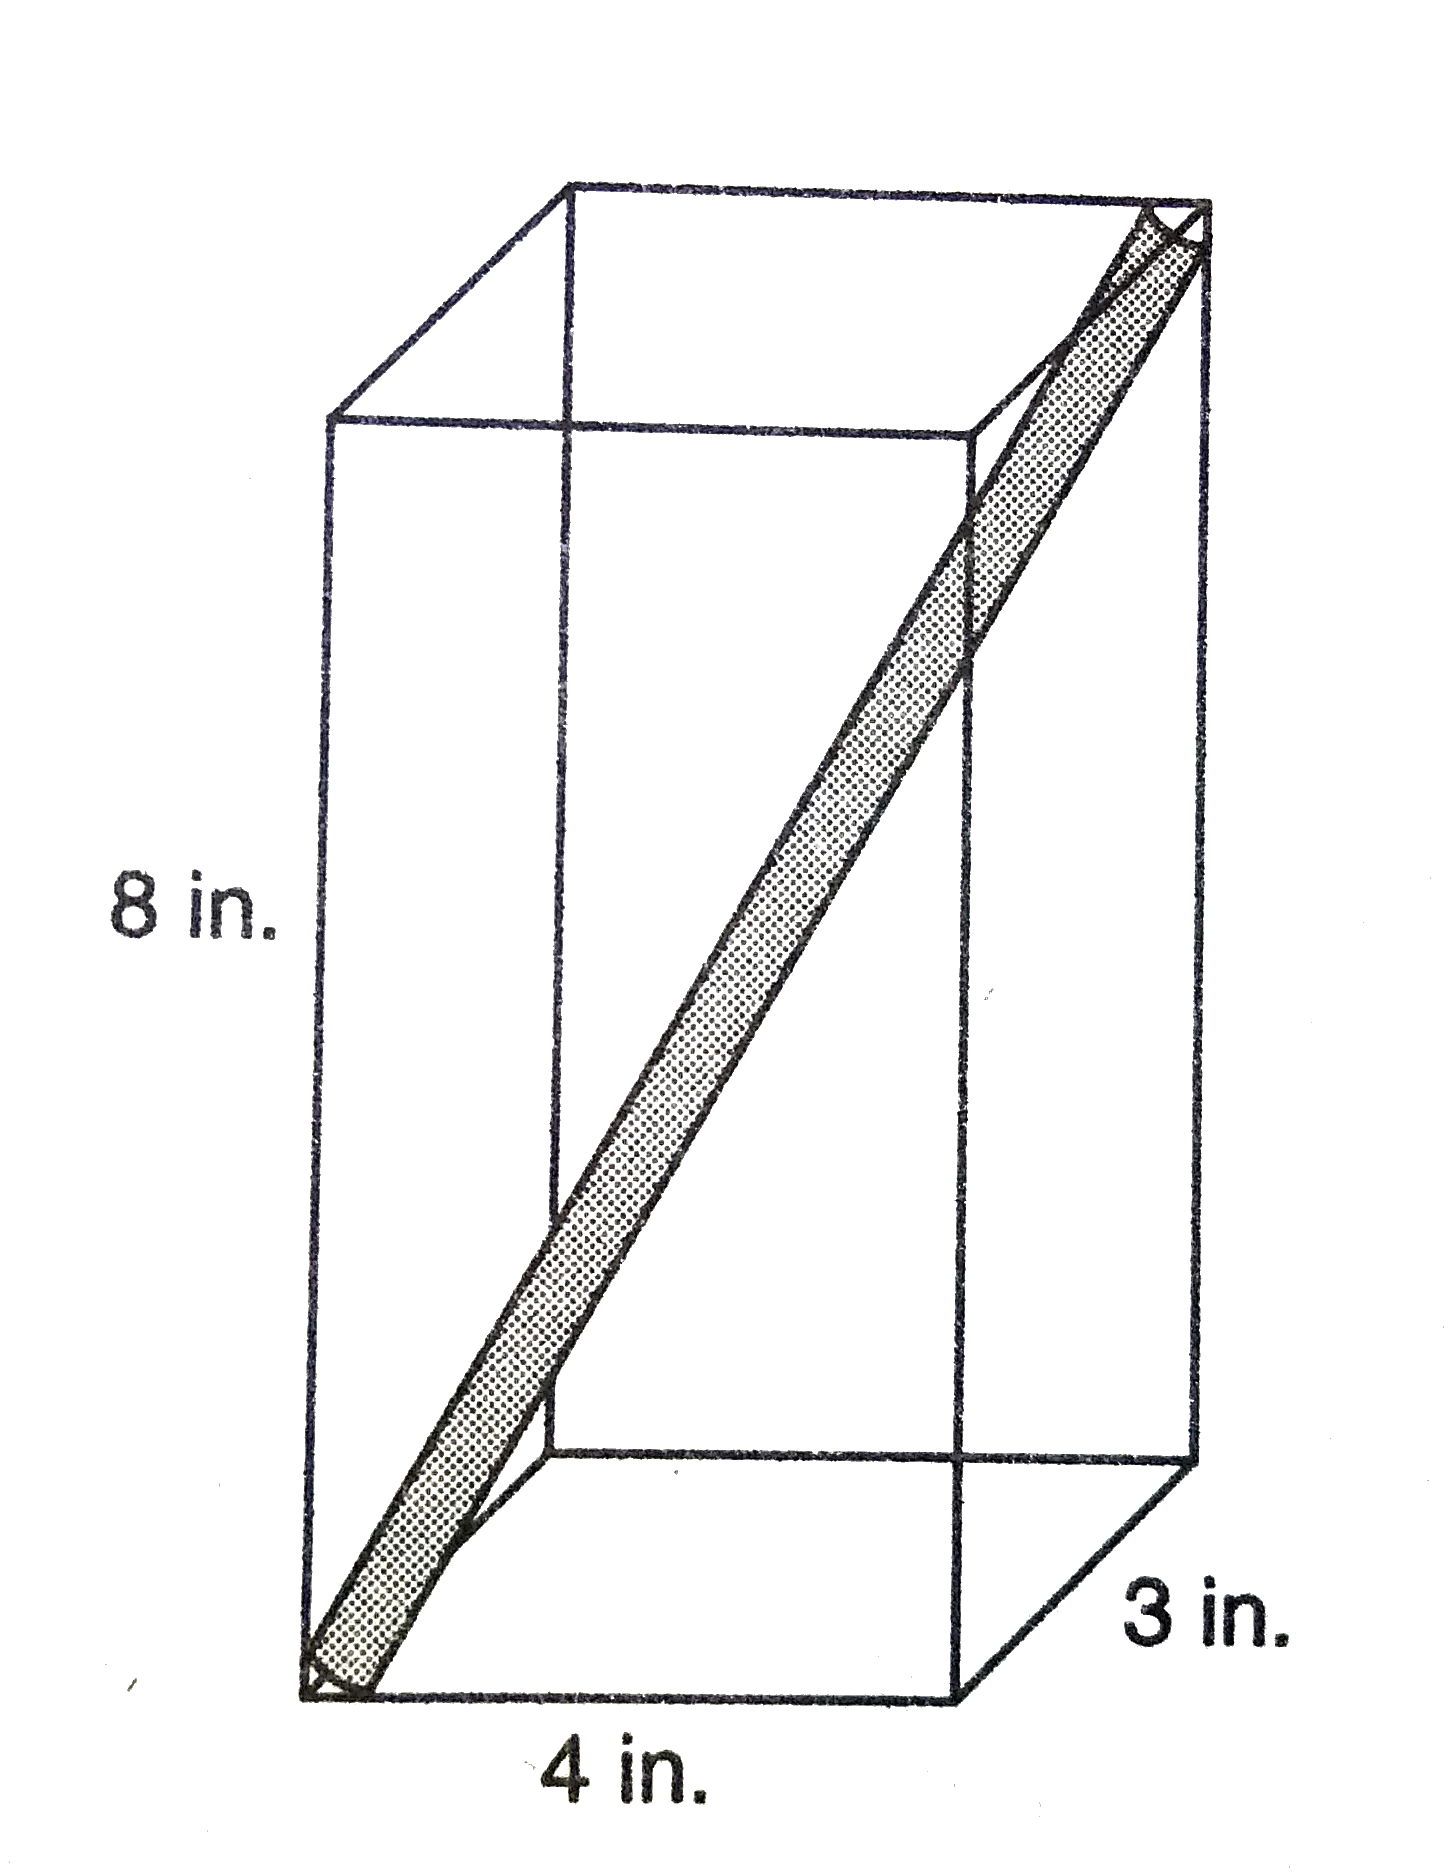 A cylindrical tube with ngligible thichness is placed into a rectangular box that  is 3 inches by 4 inches by 8 inches, as shown in the accompanying diagram. If the tubes fits exactly into the box  diagonally from the bottom left corner to the top right back corner, what is the best approximately of the number of inches in the length of the cube?